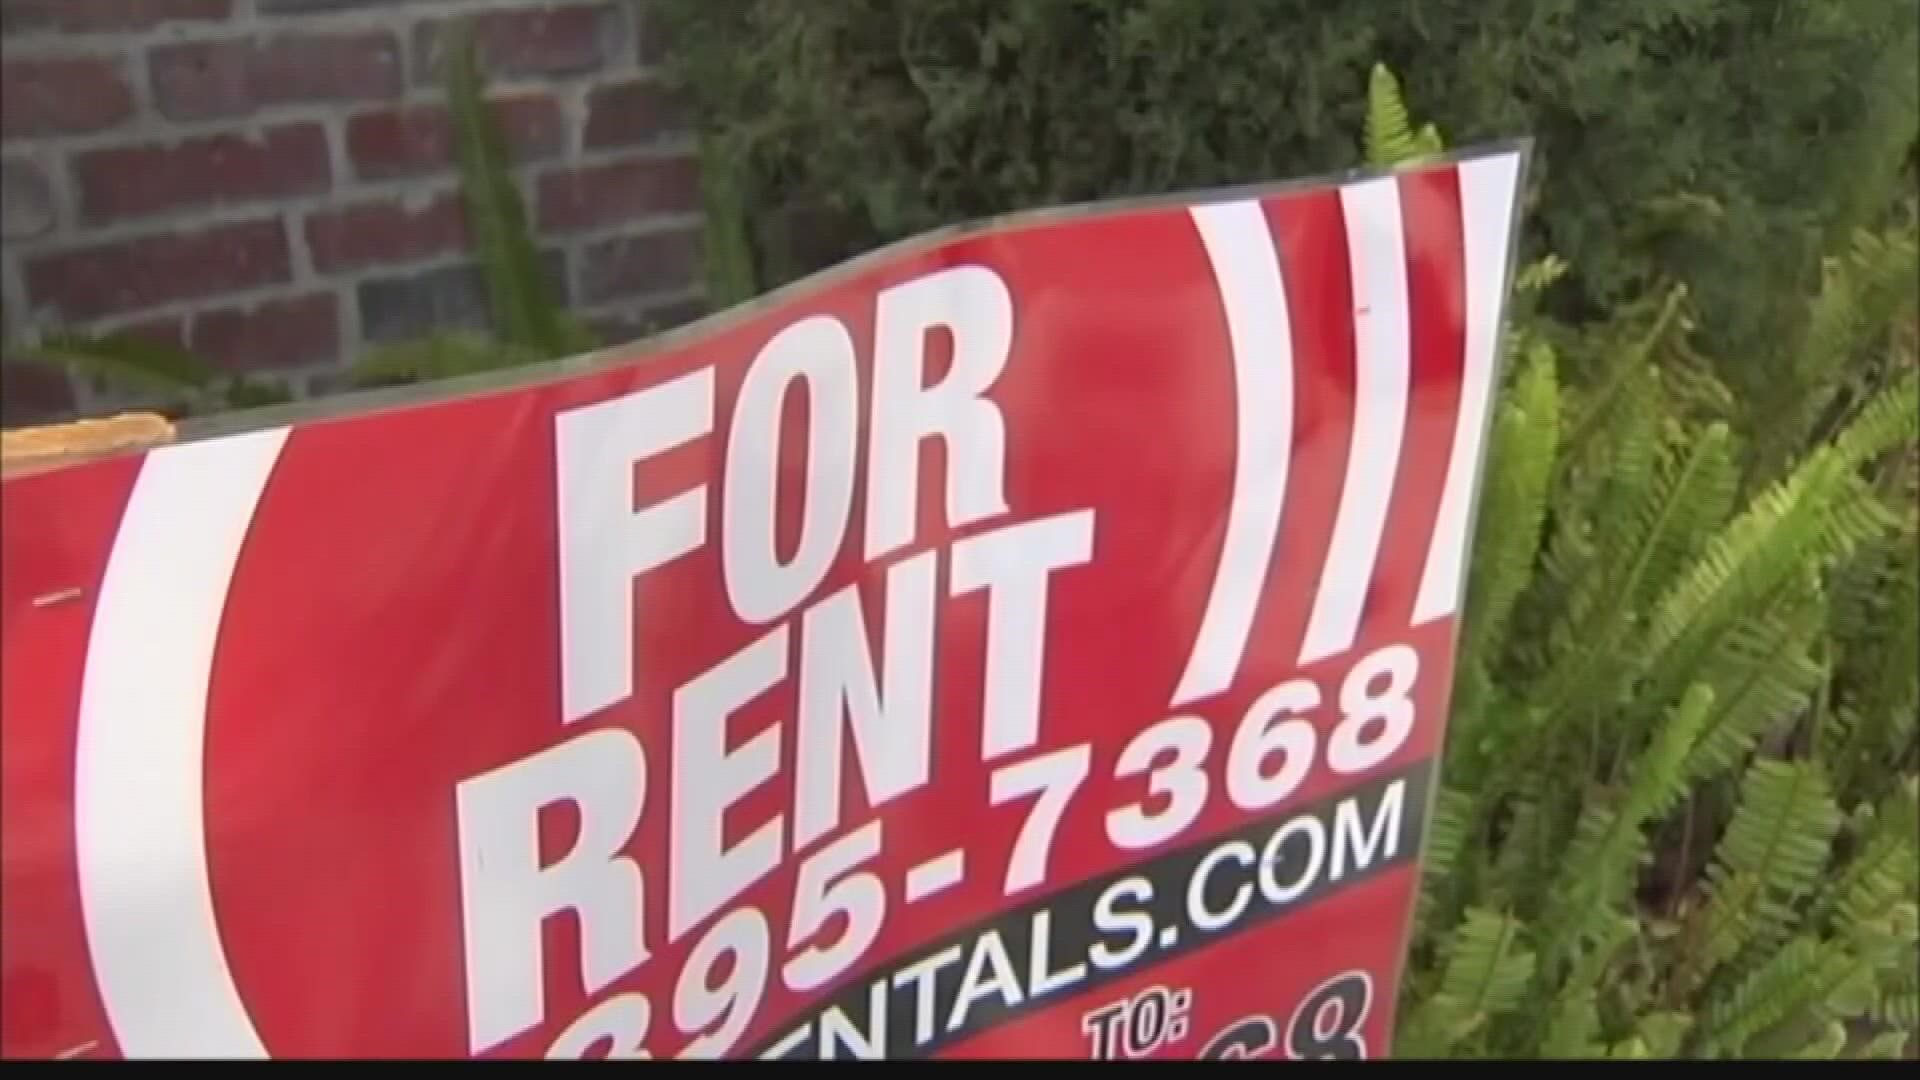 One man tells First Coast News that after his property was purchased, the standards have been slipping.